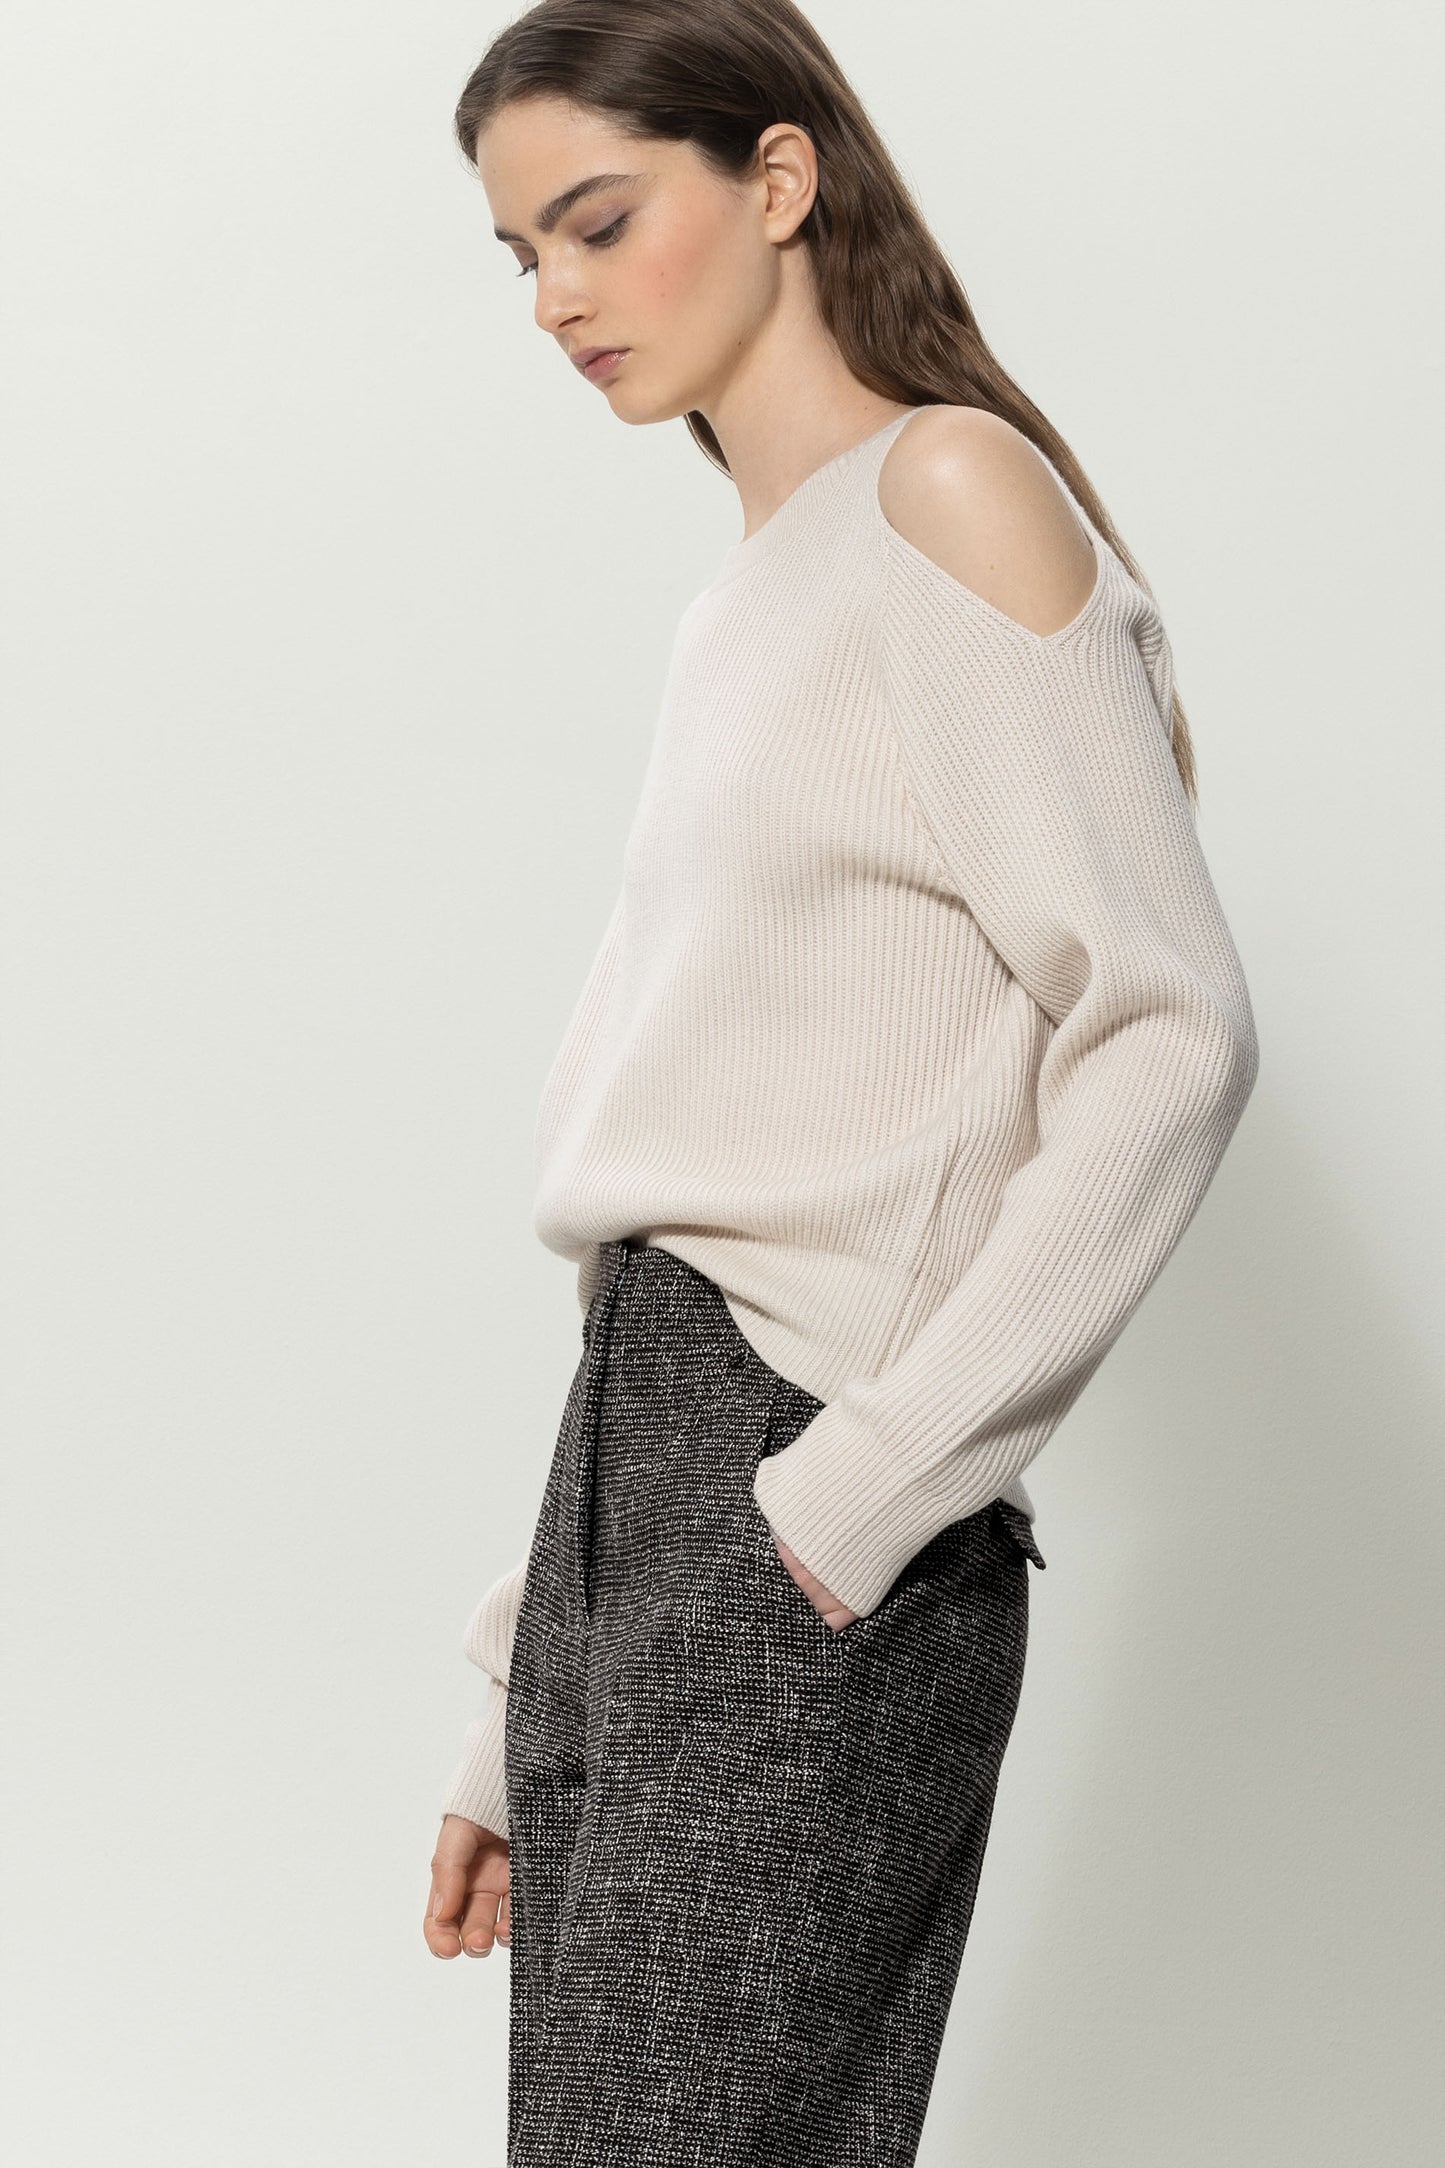 Knitted Sweater with A Cut-out on the Left Shoulder